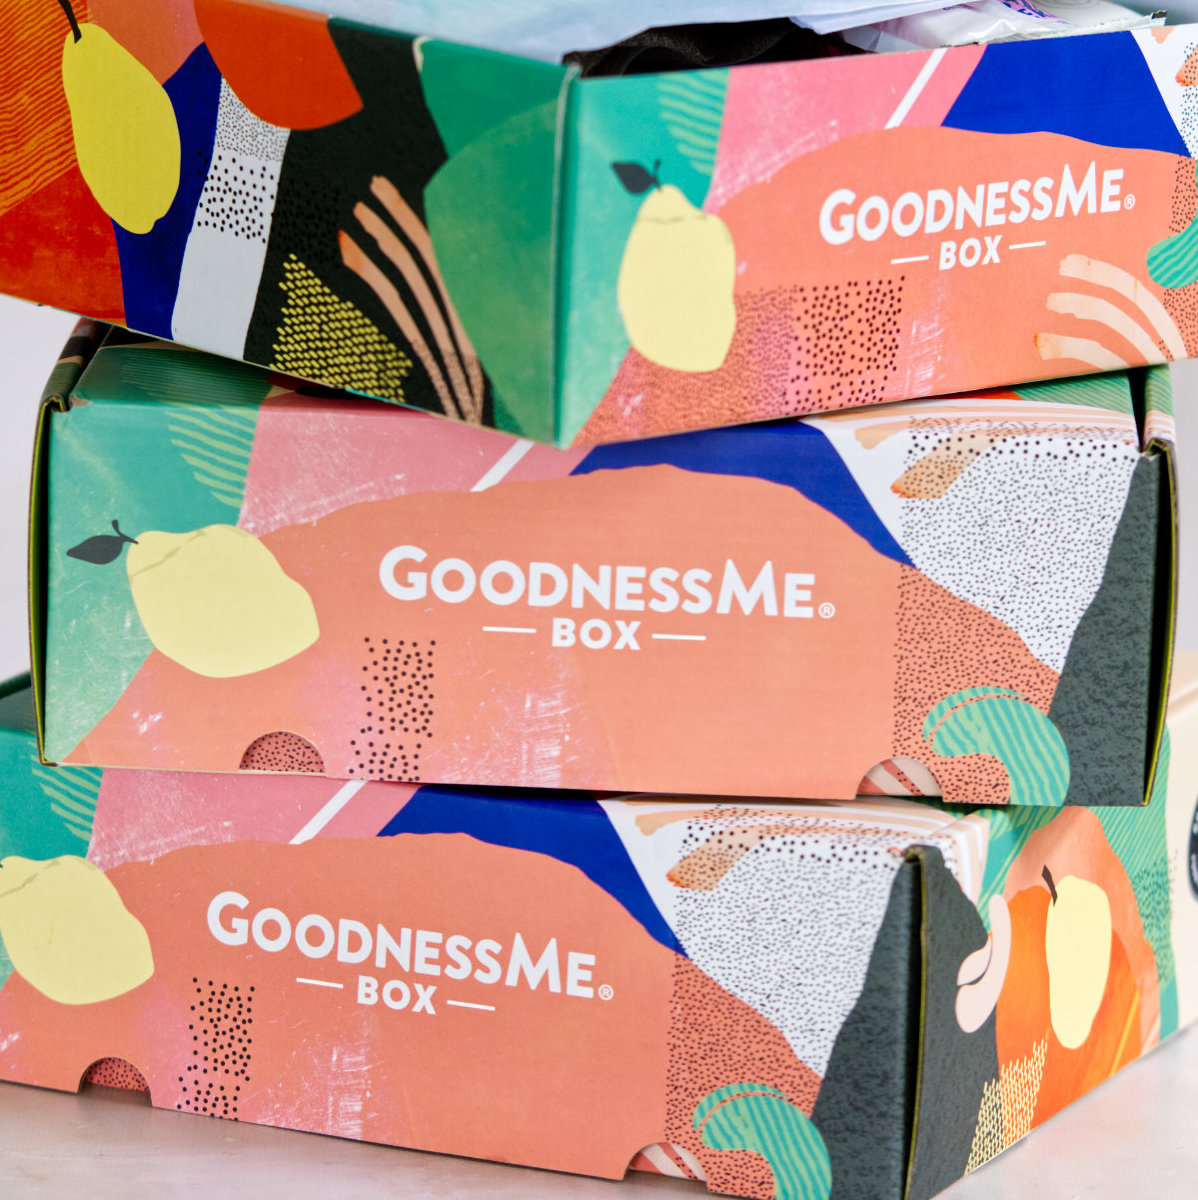 3 x GoodnessMe boxes stacked